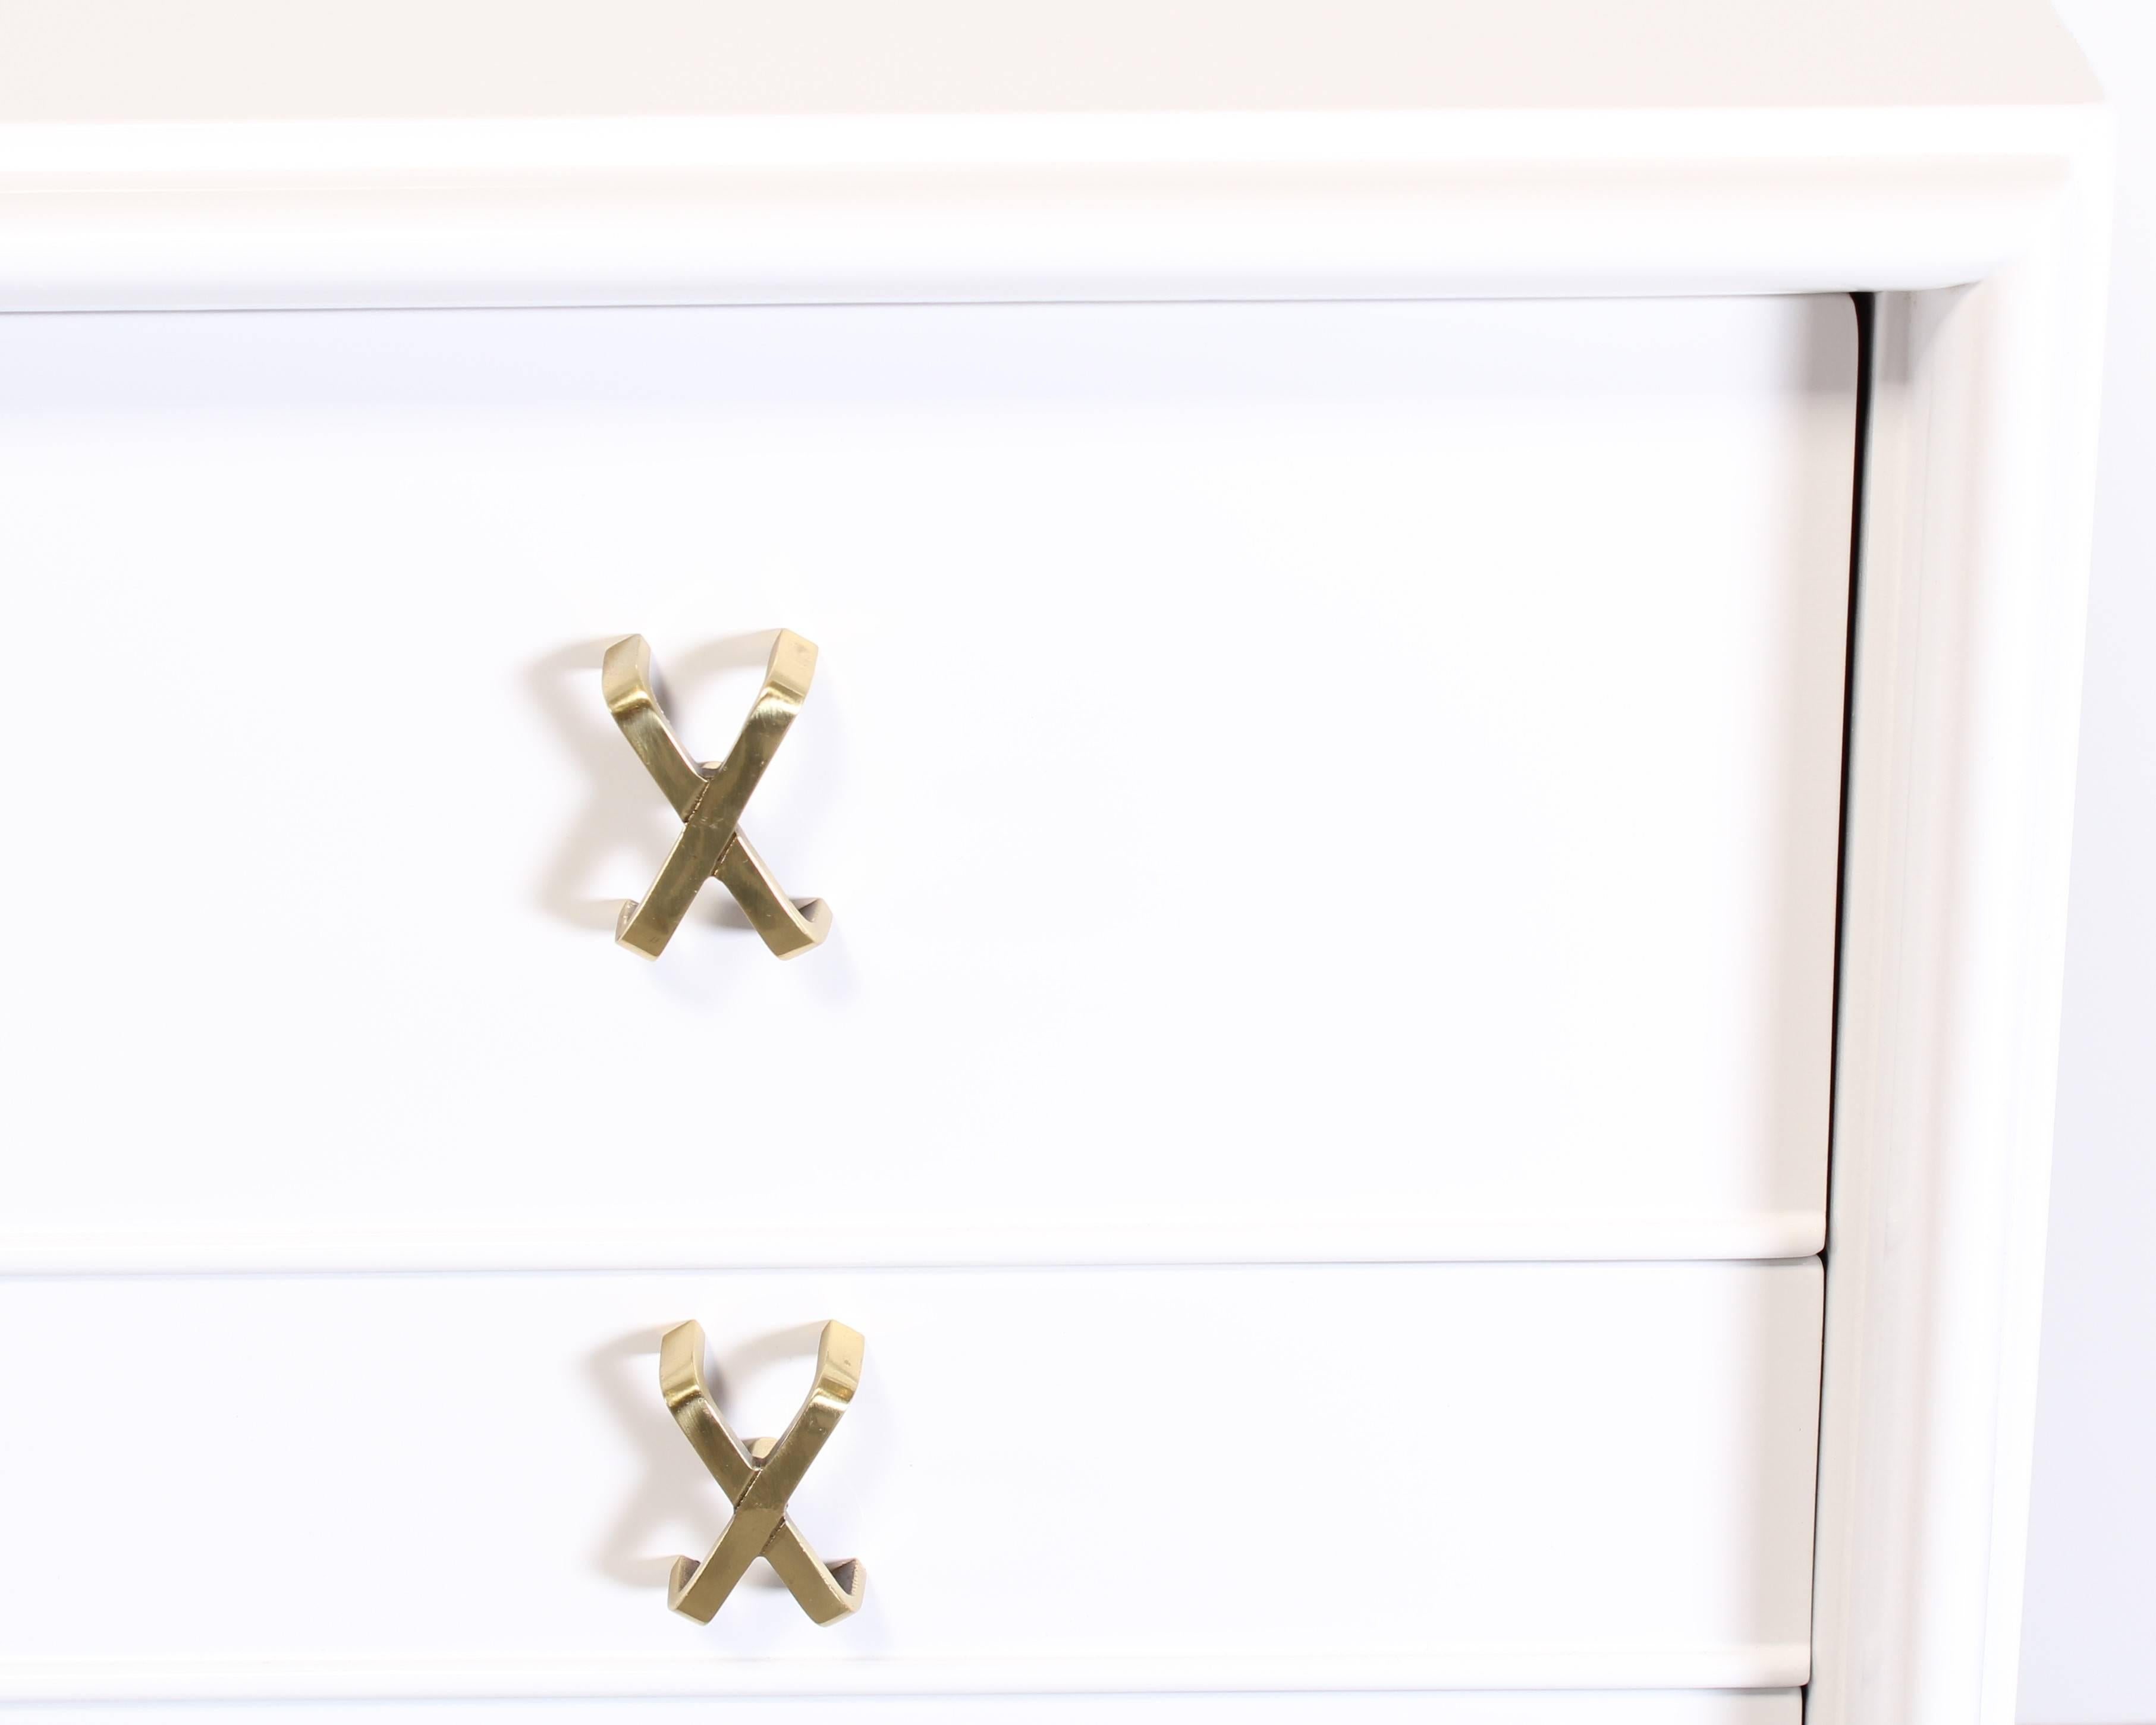 Automotive Paint Ten-Drawer Dresser with Brass X Pulls by Paul Frankl for Johnson Furniture Co.